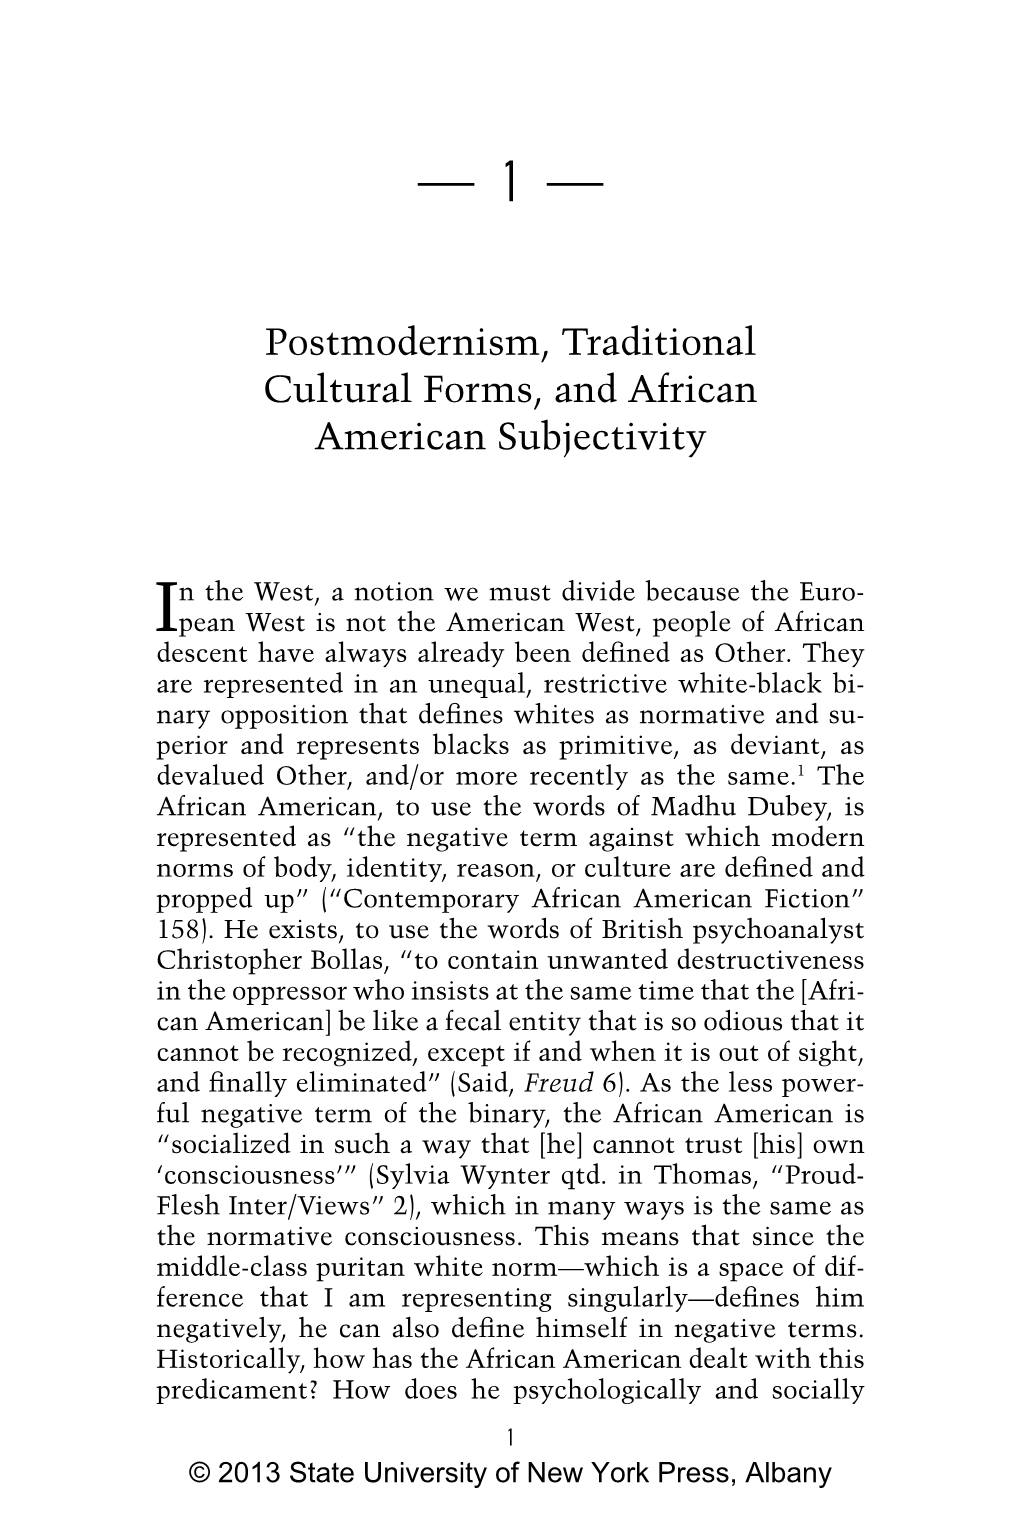 Postmodernism, Traditional Cultural Forms, and African American Subjectivity